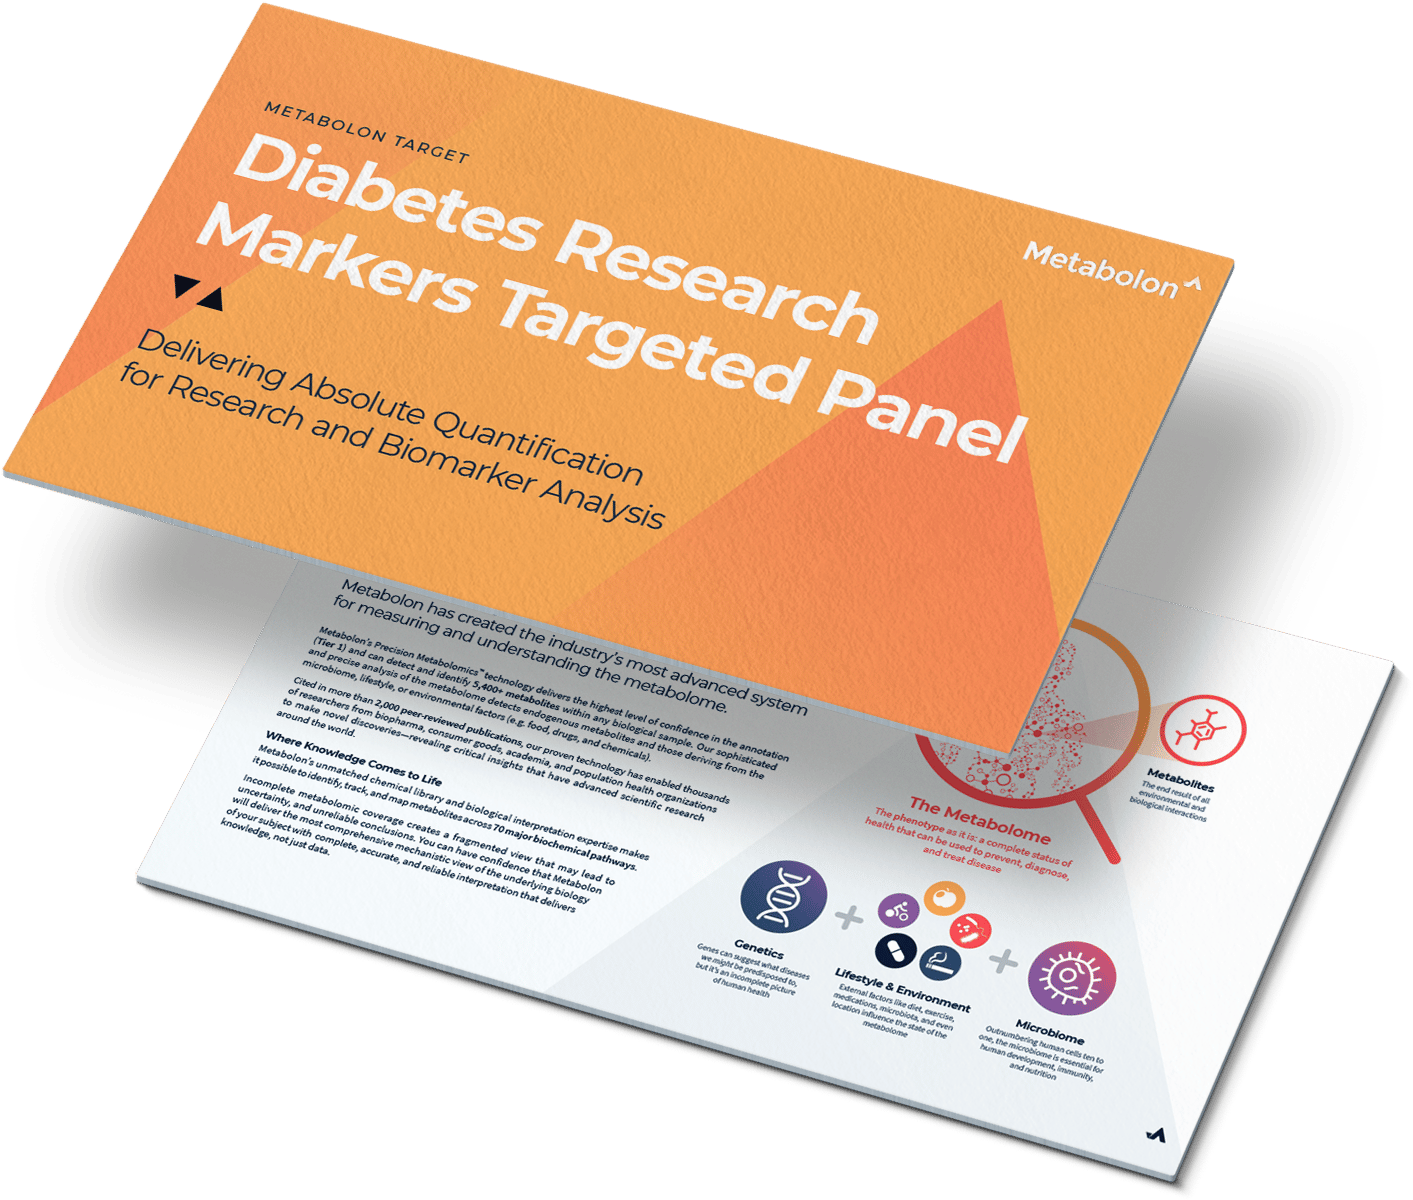 Diabetes Research Markers Targeted Panel